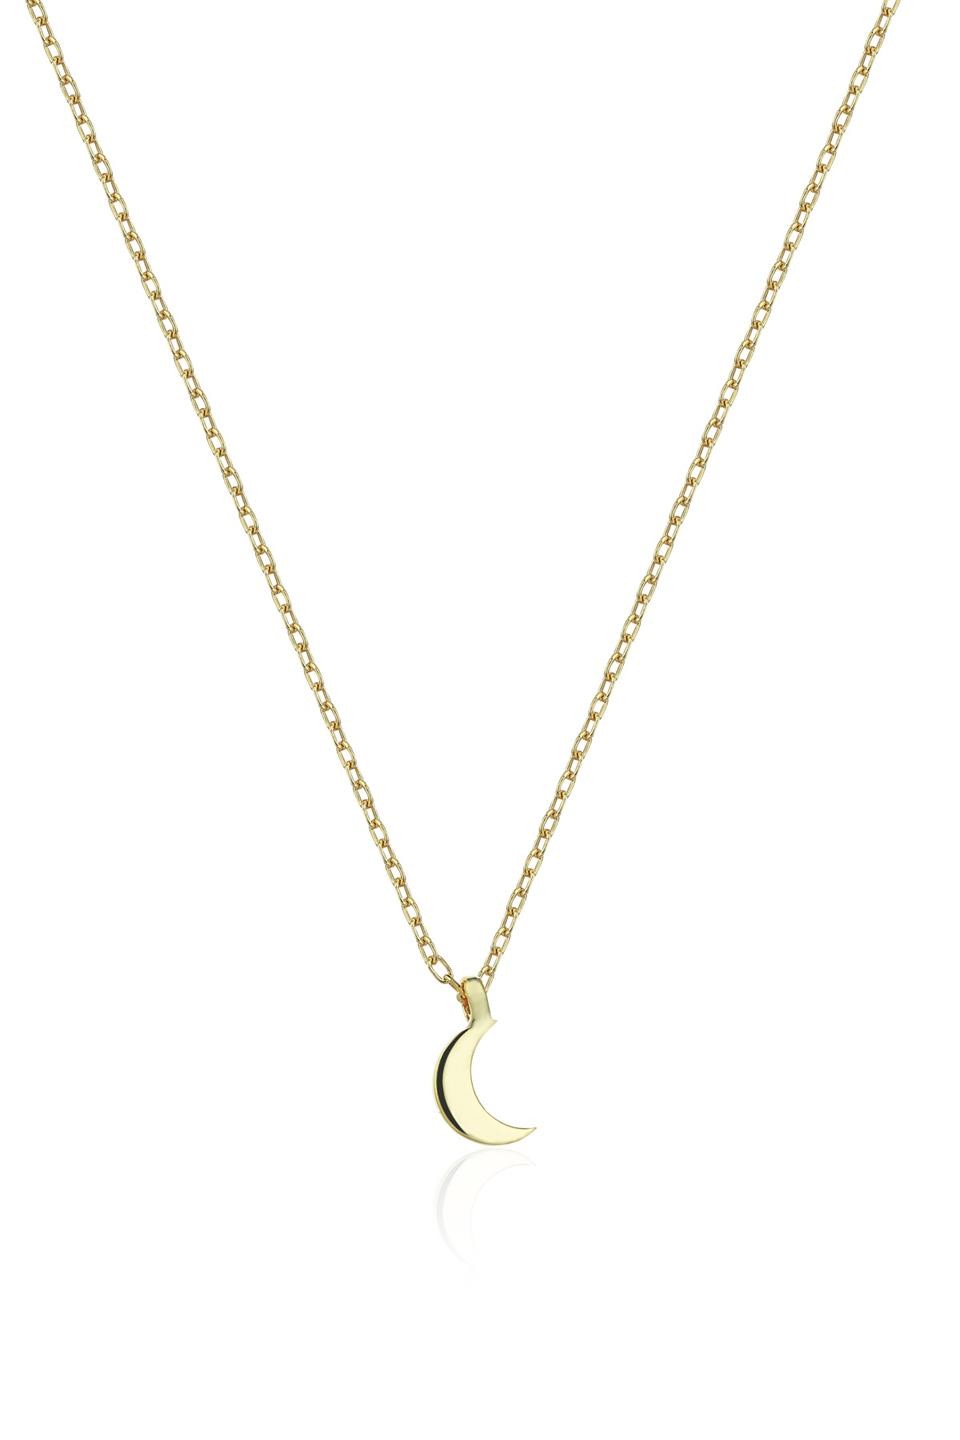 925 sterling silver necklace with crescent